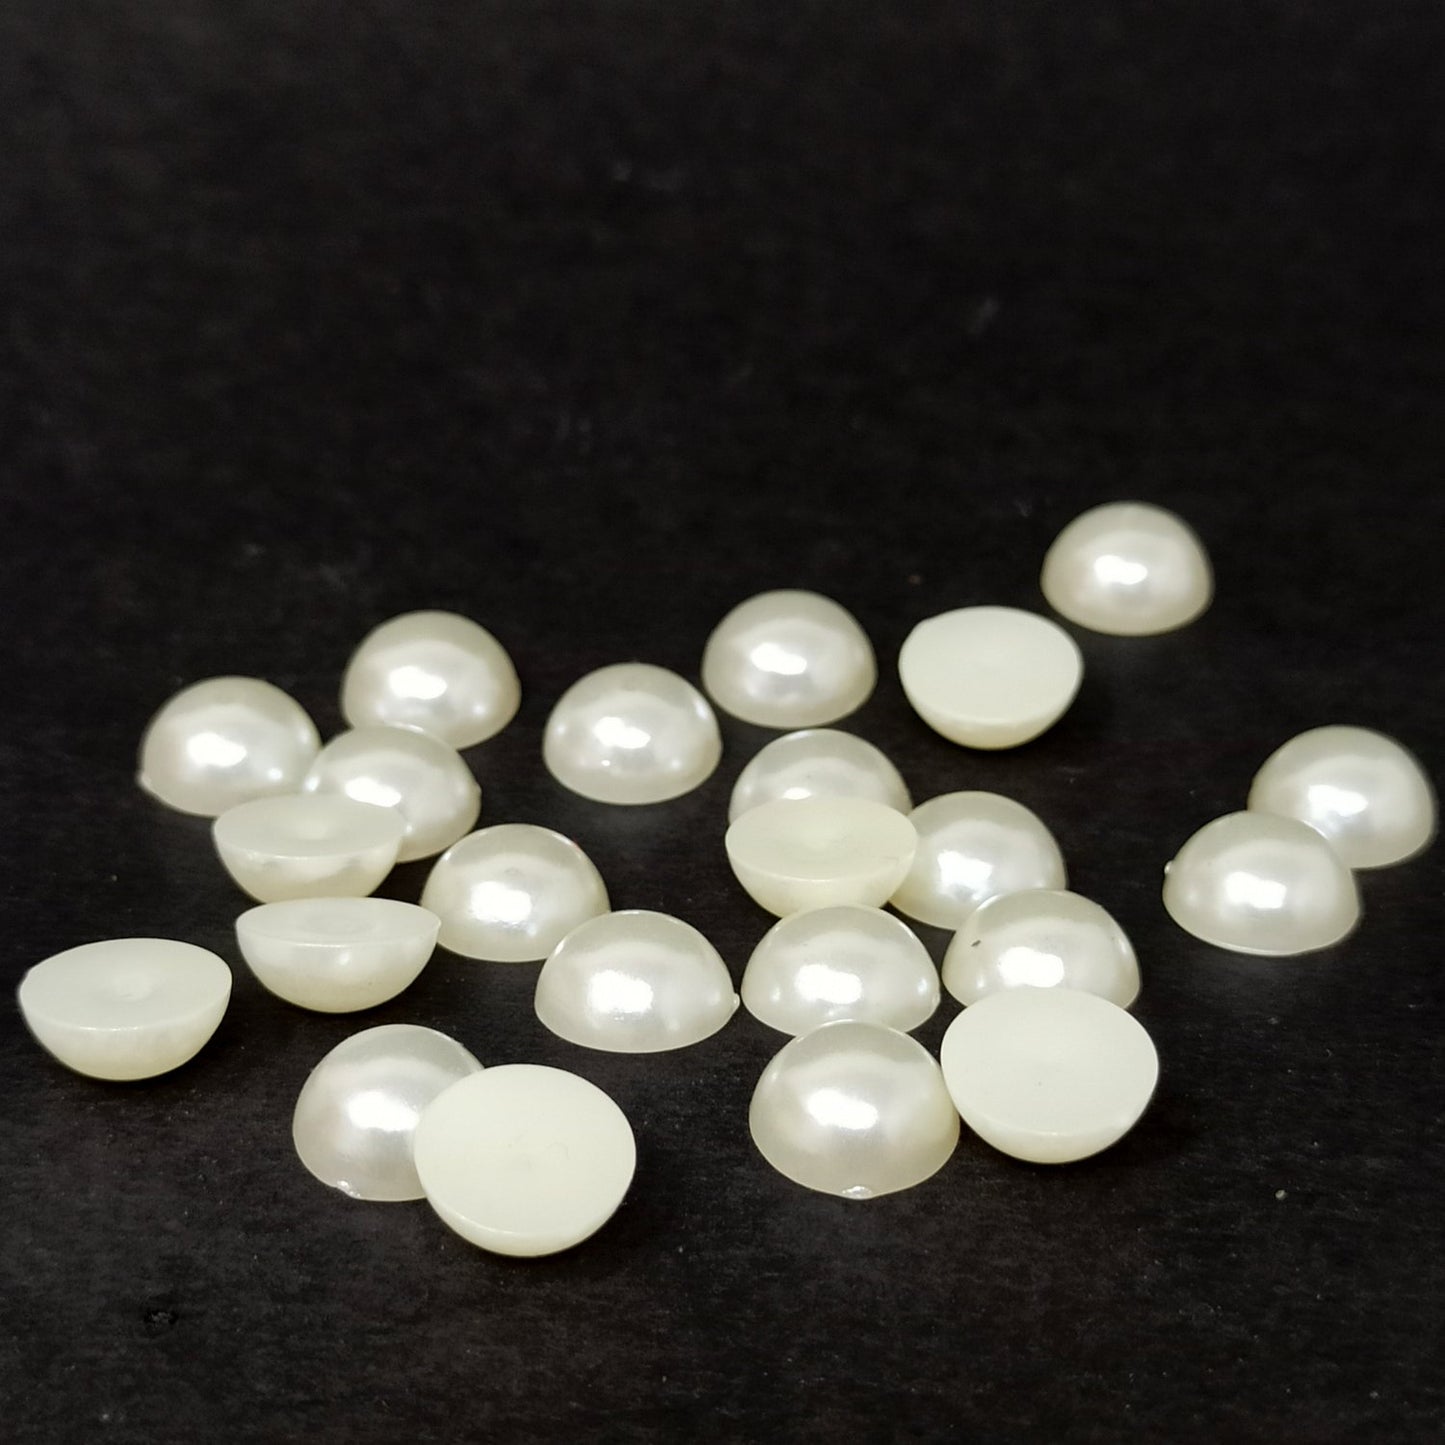 10 mm Off  White Half Pearl Beads for Jewellery Making and Decoration (25 Beads) - 96-36